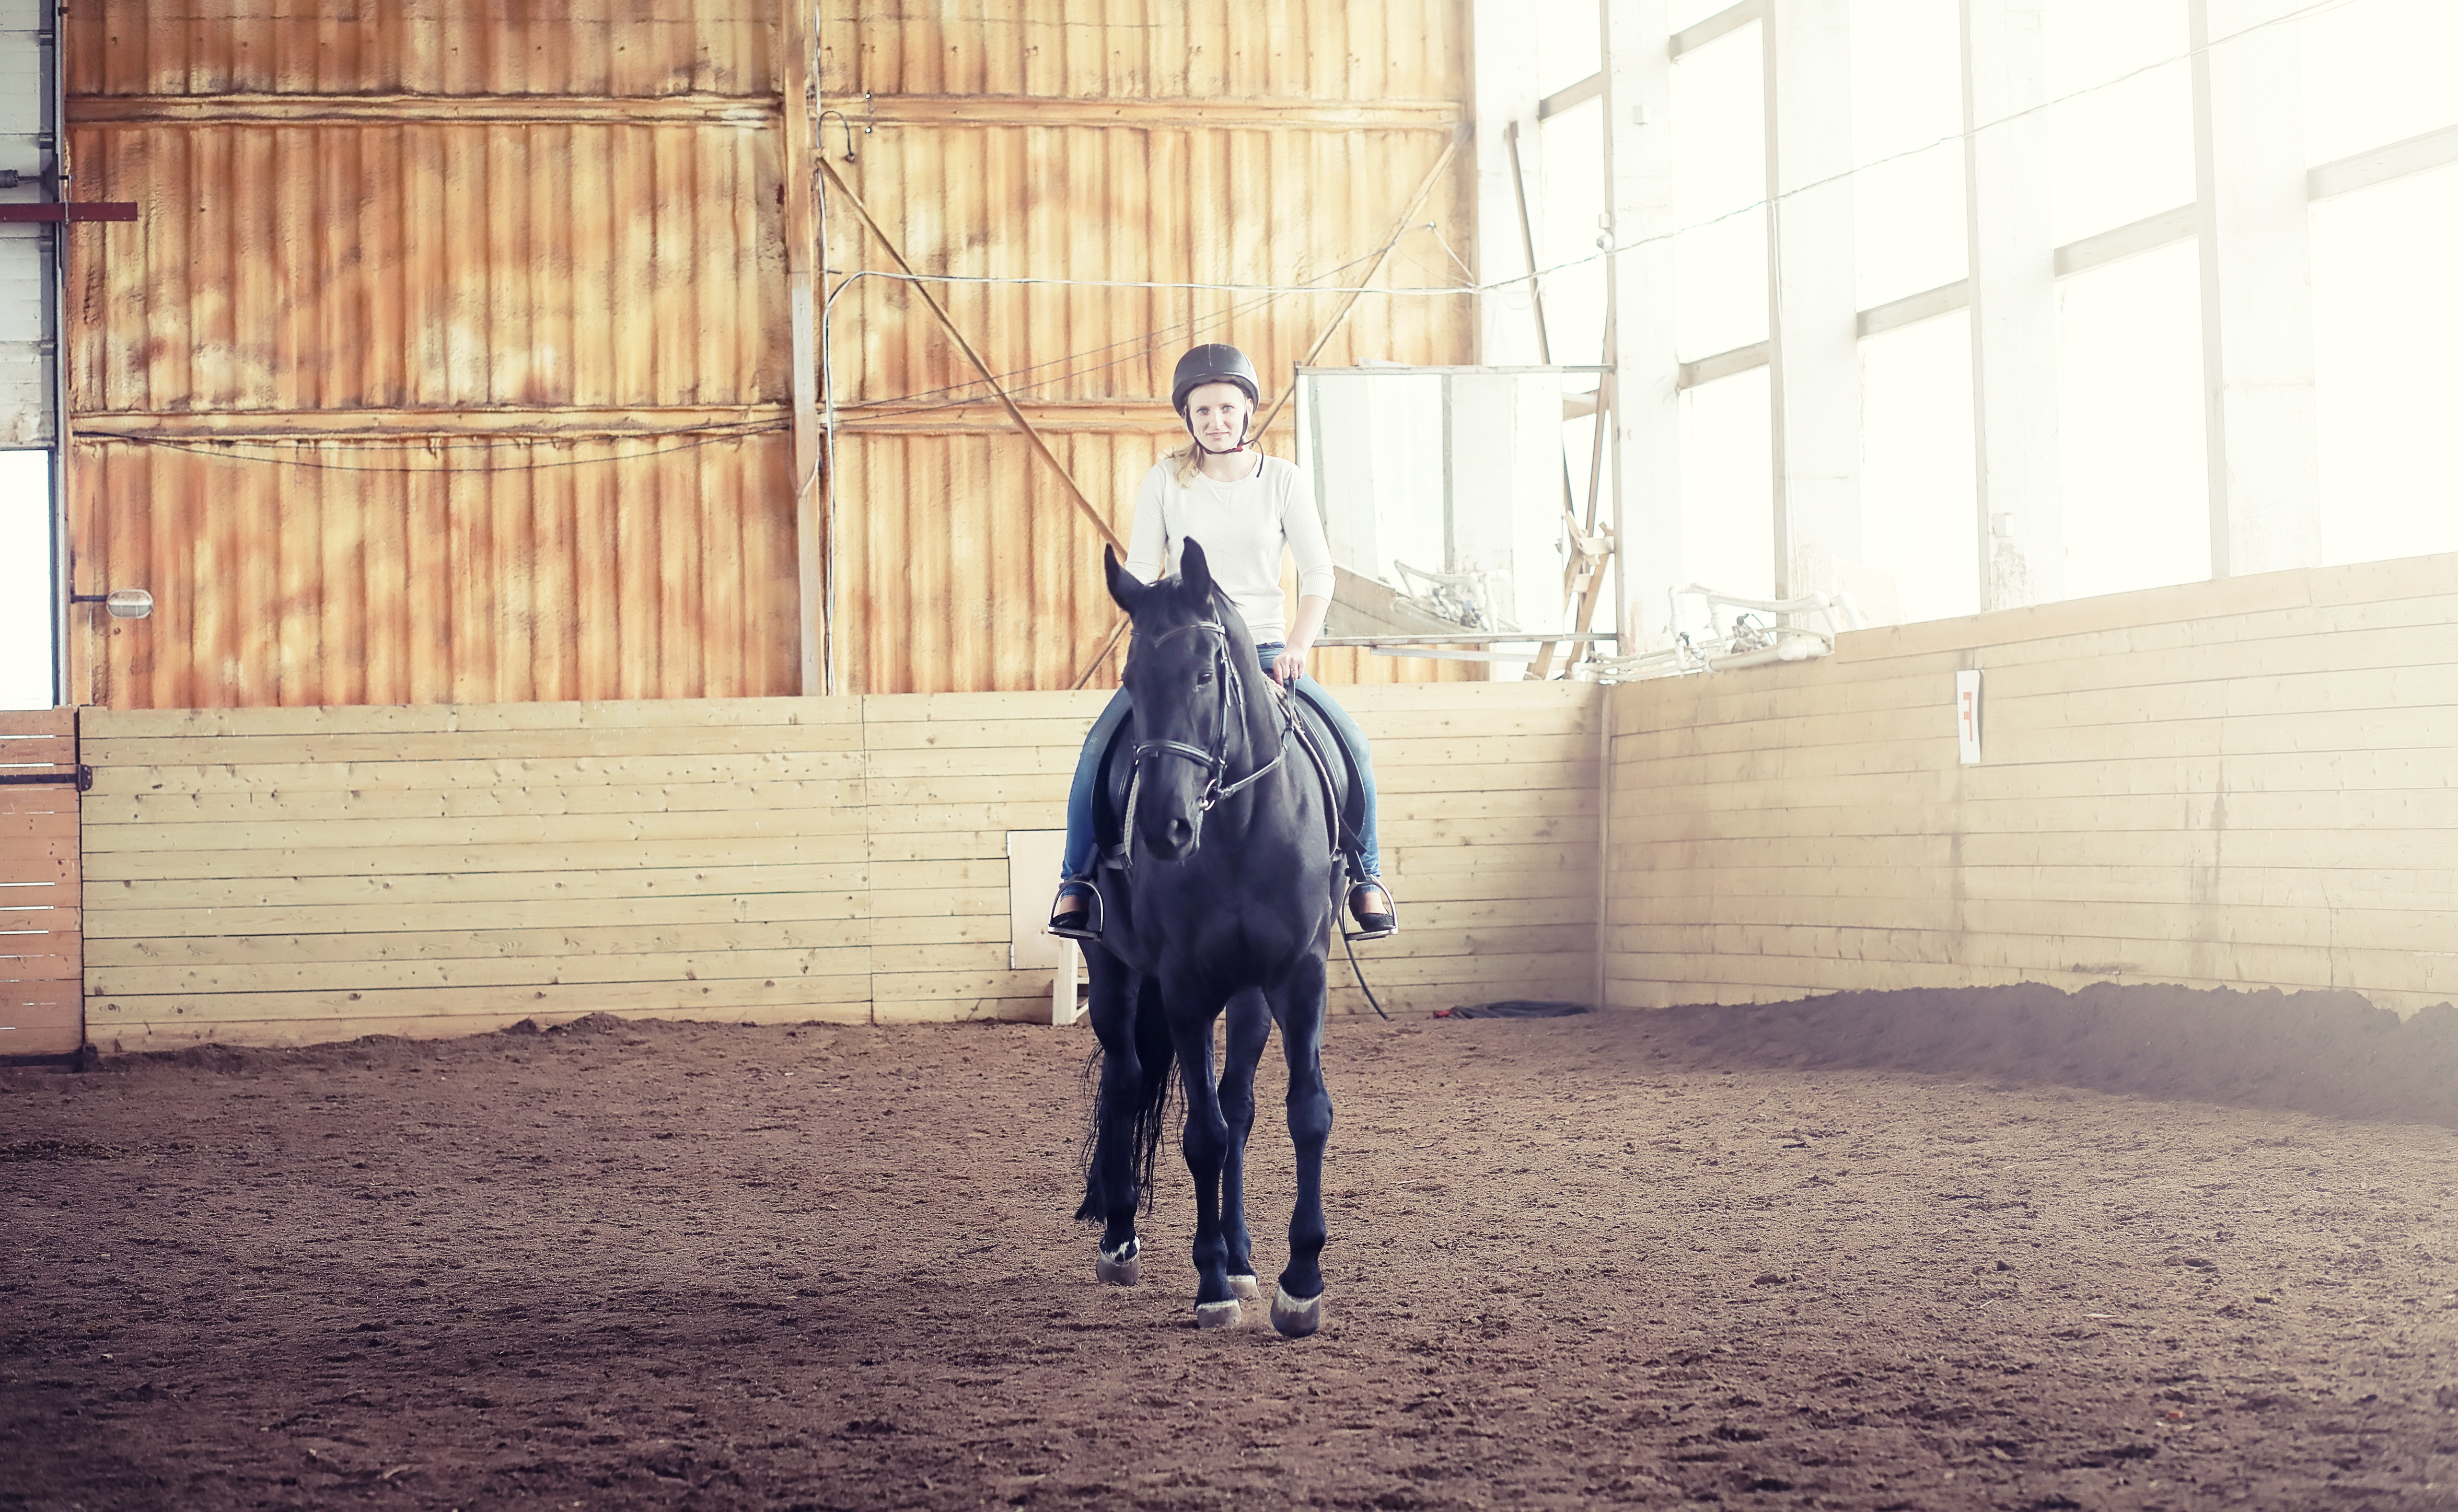 A woman riding in an indoor arena.